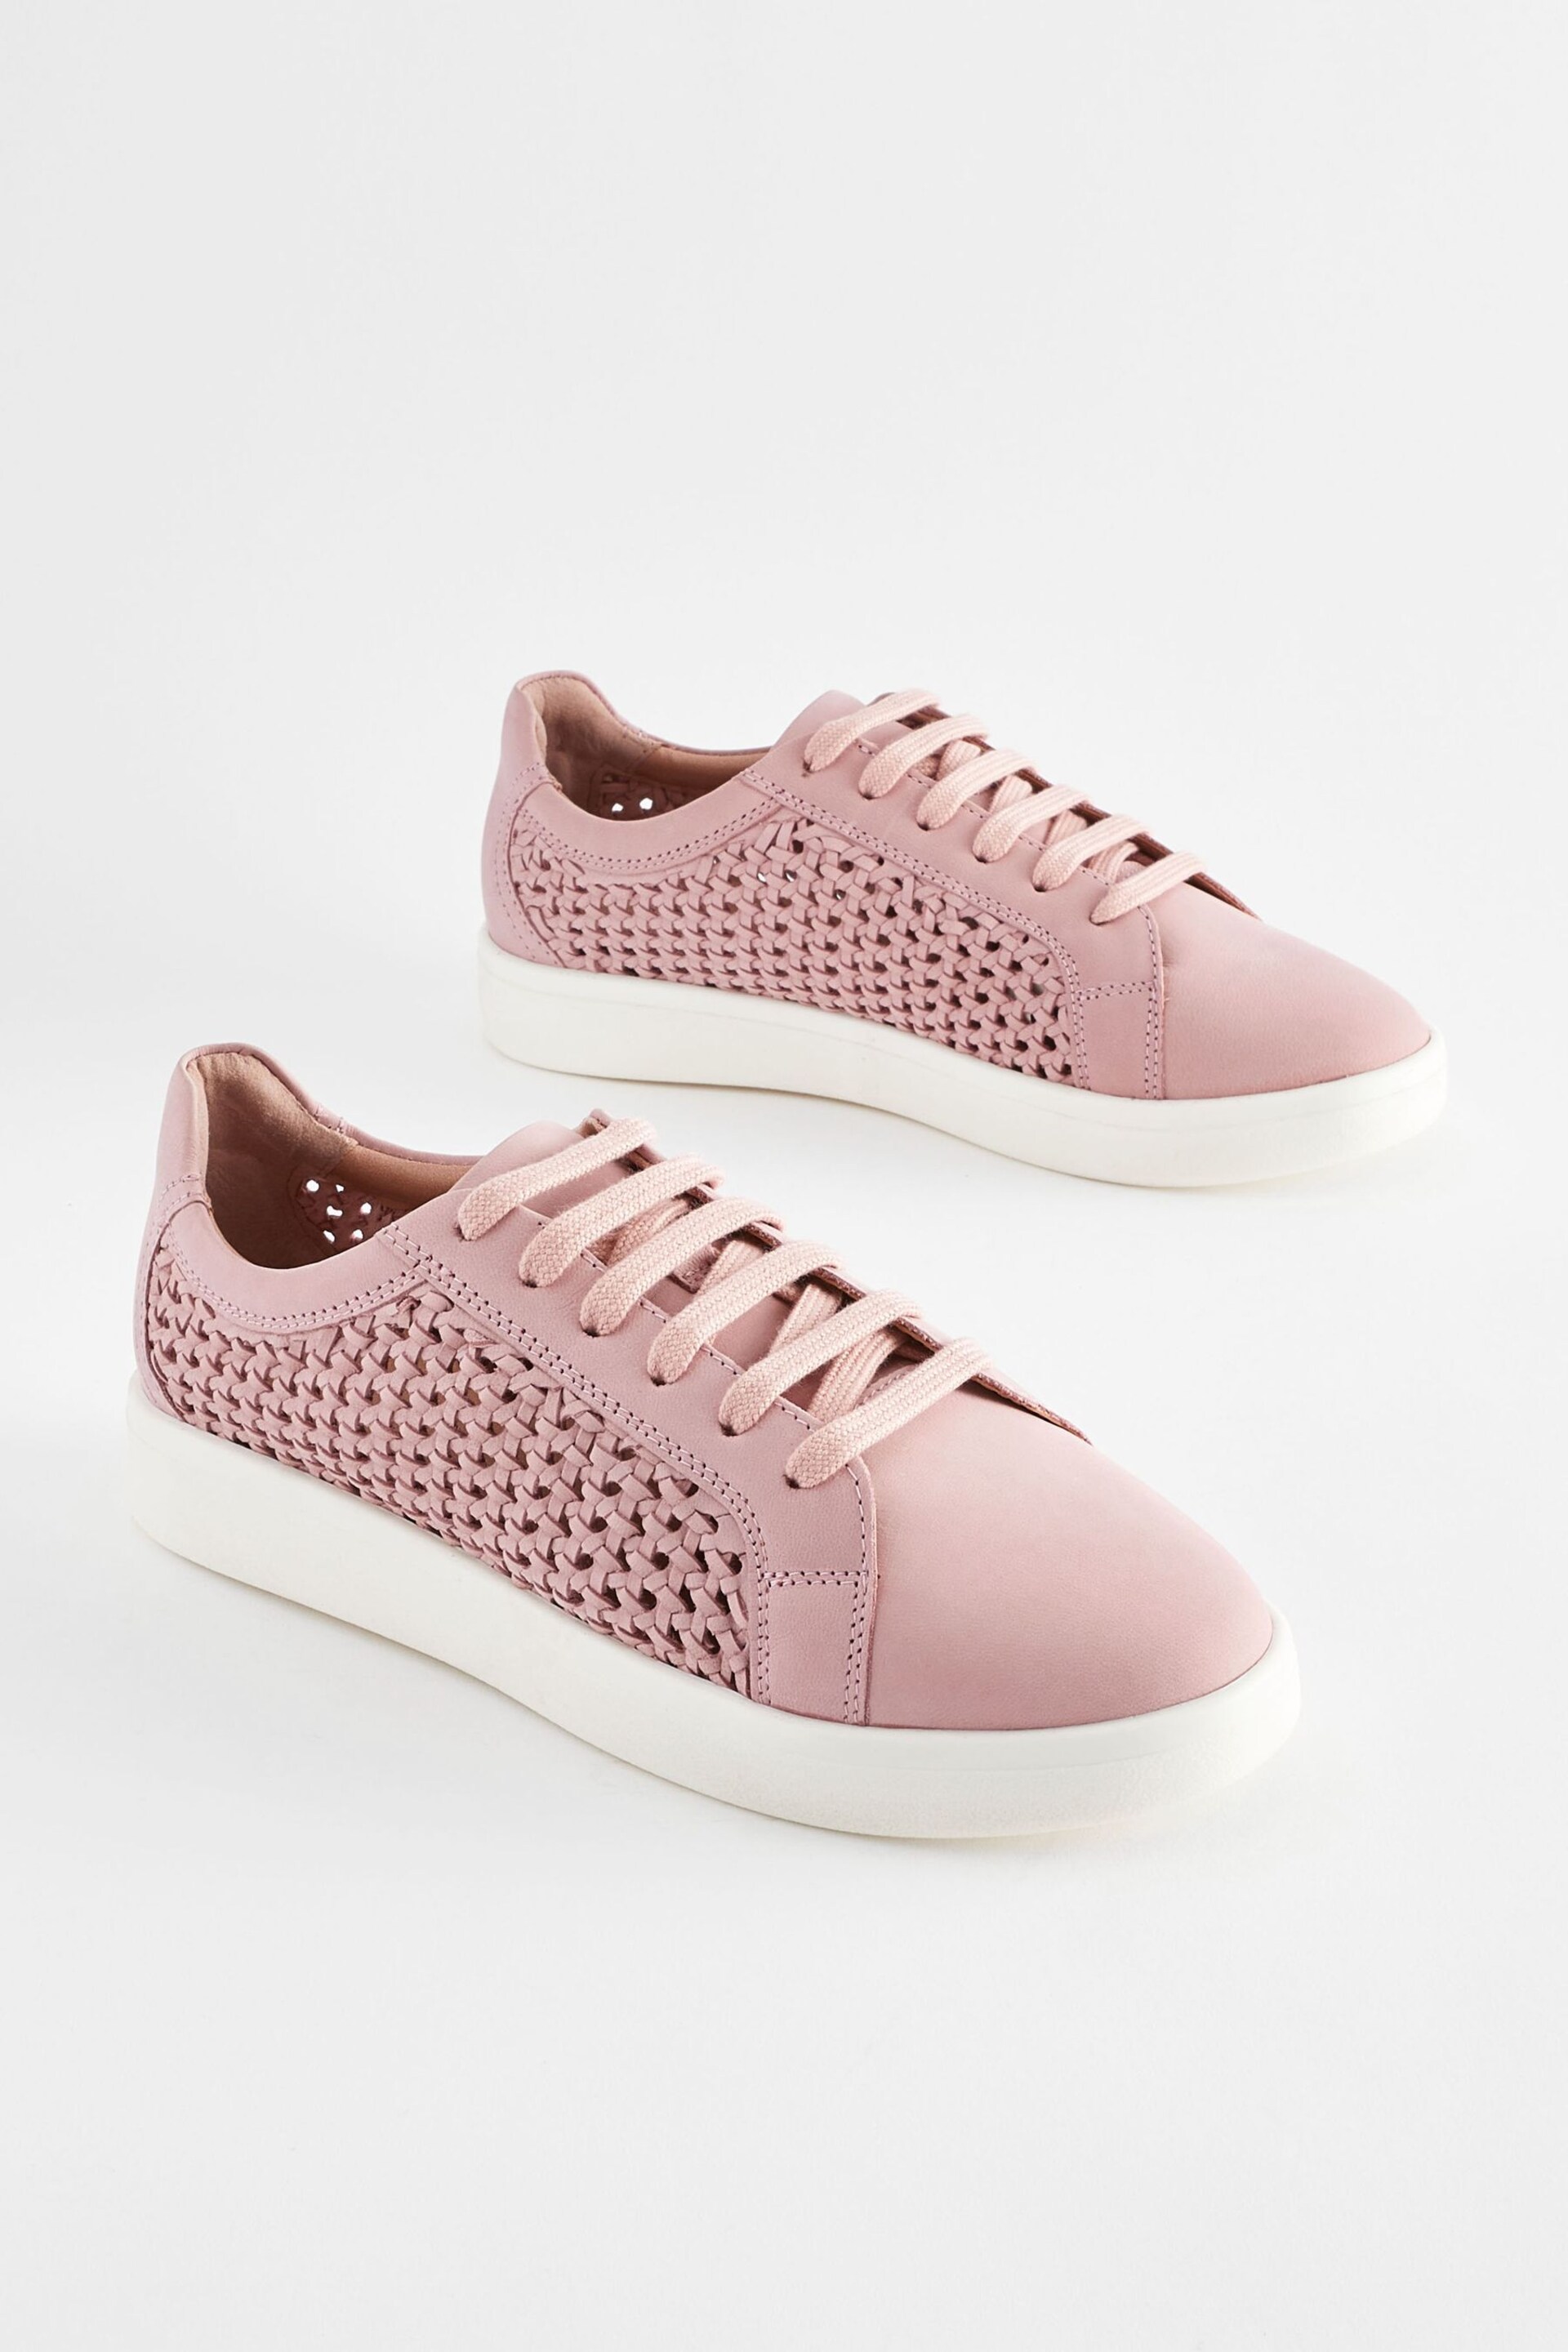 Pink Signature Leather Weave Lace-Up Trainers - Image 4 of 8